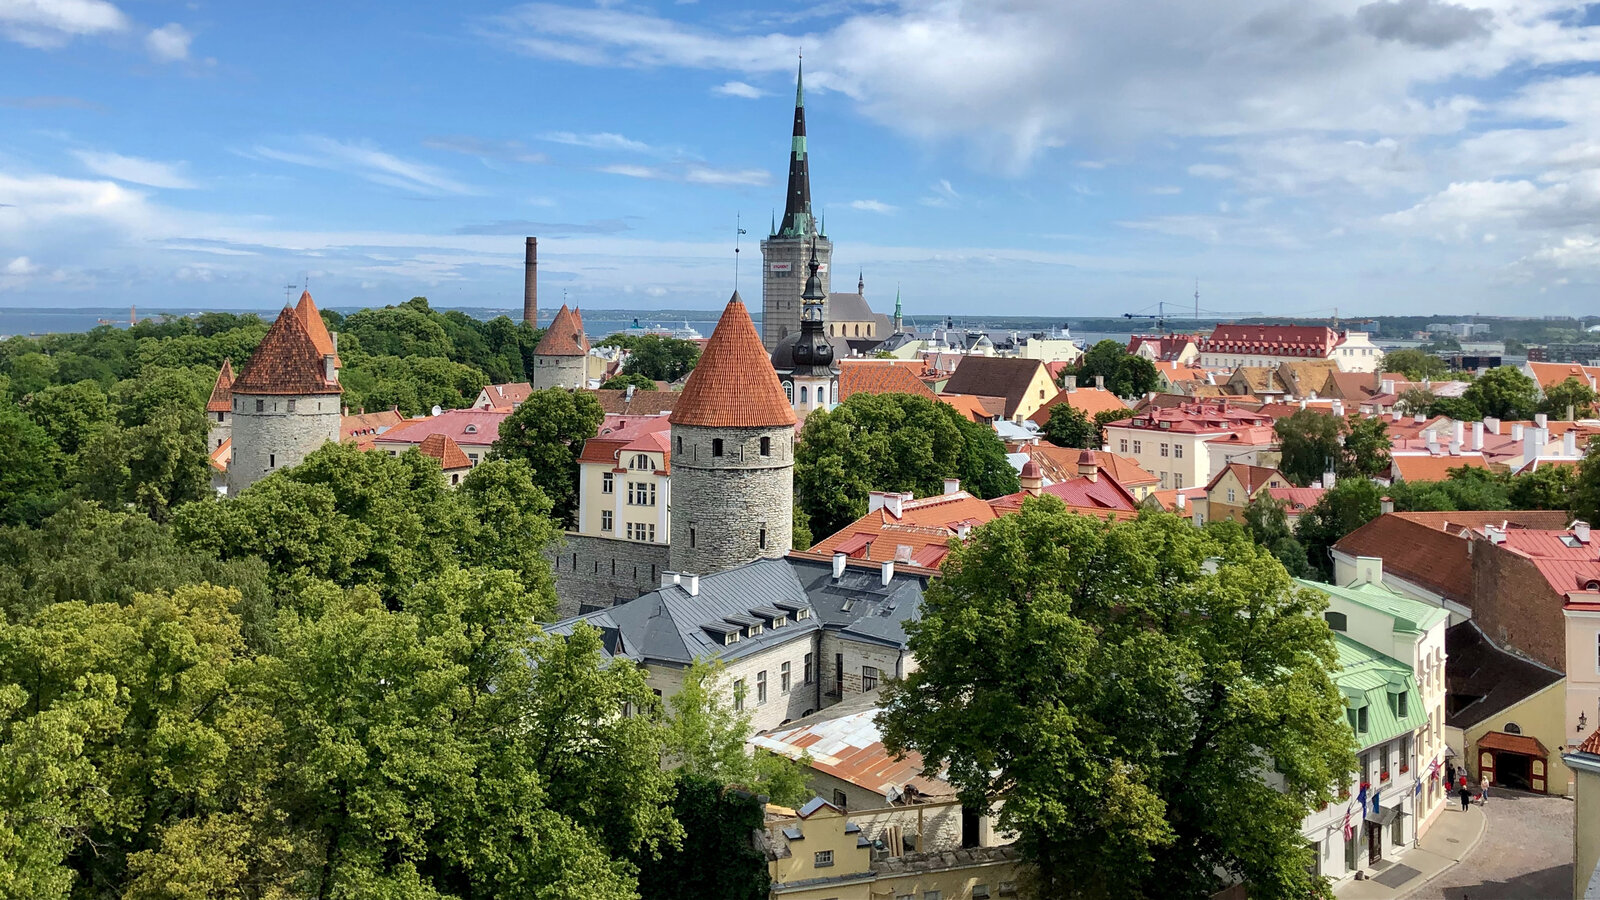 Applying for Estonian Citizenship: Requirements, Documents and Exams